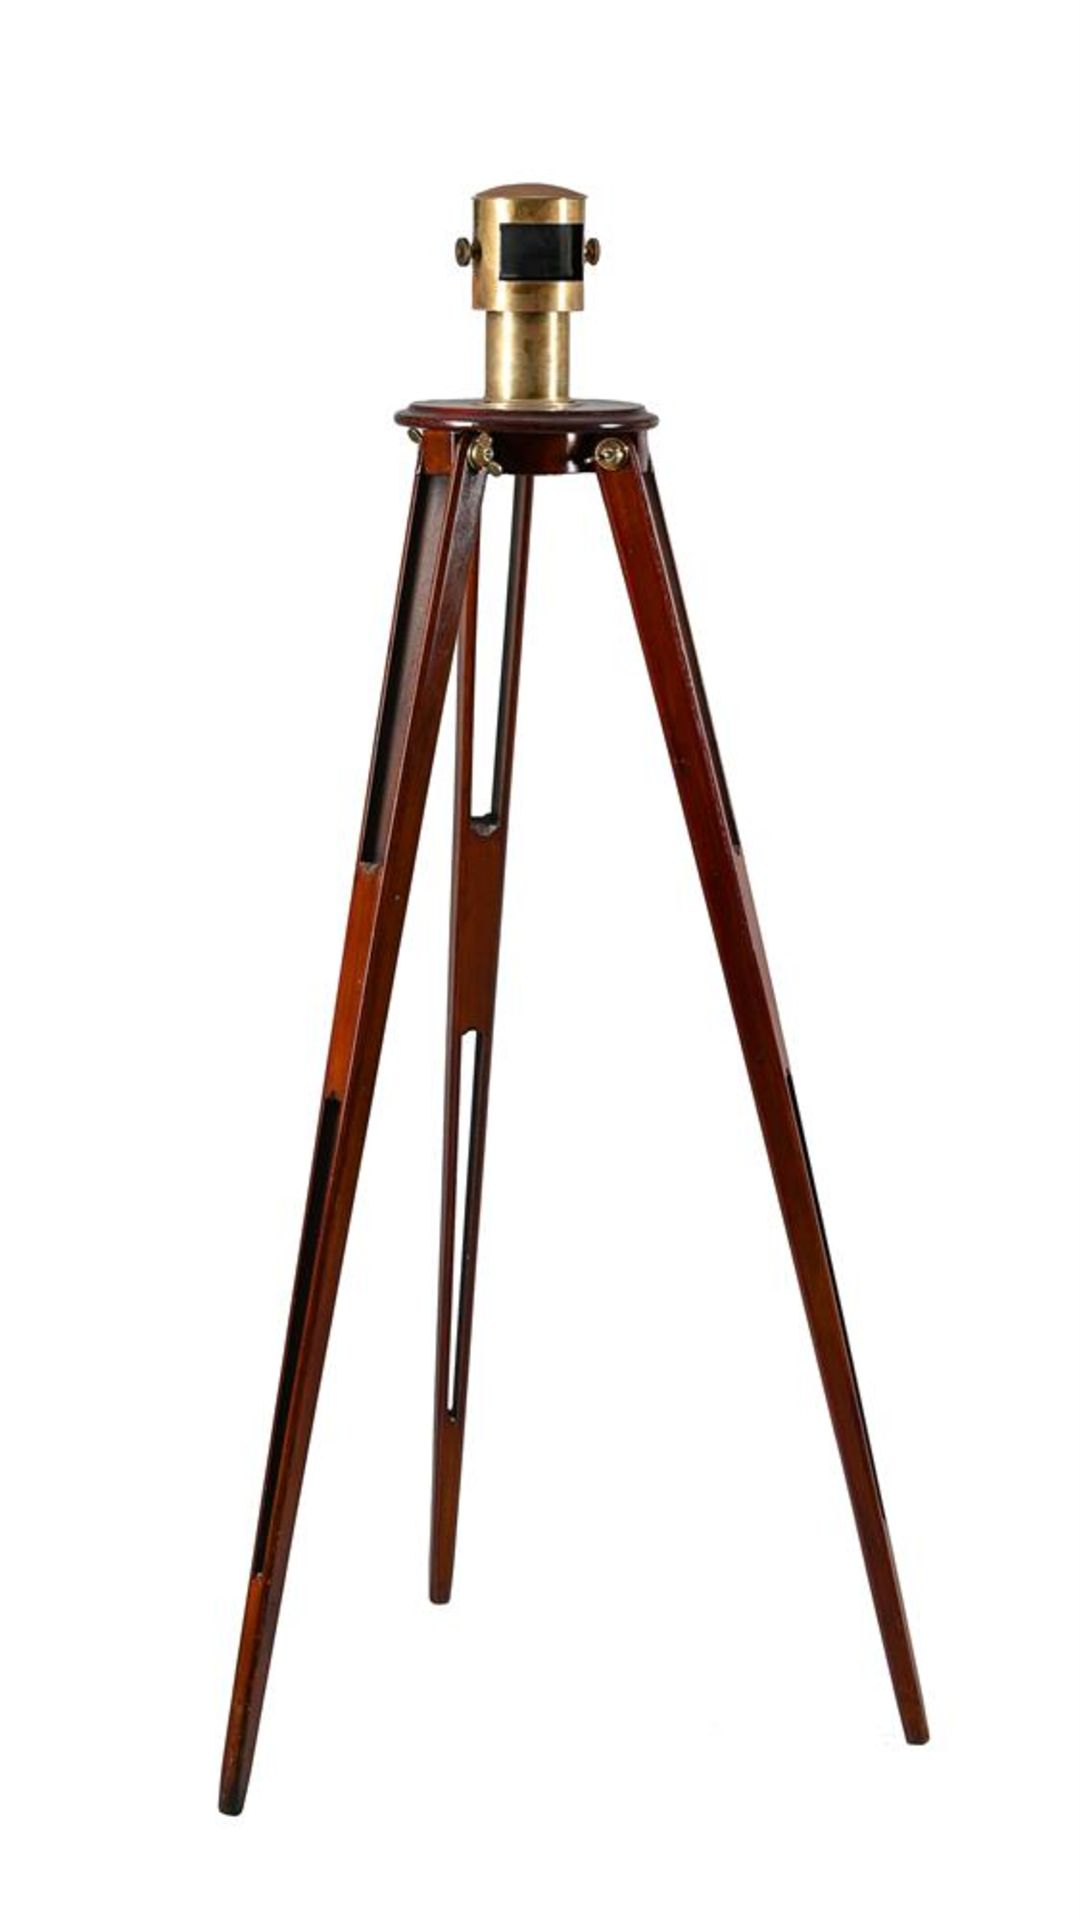 A BRASS-CASED REFLECTING PRISM ON MAHOGANY TRIPOD STAND